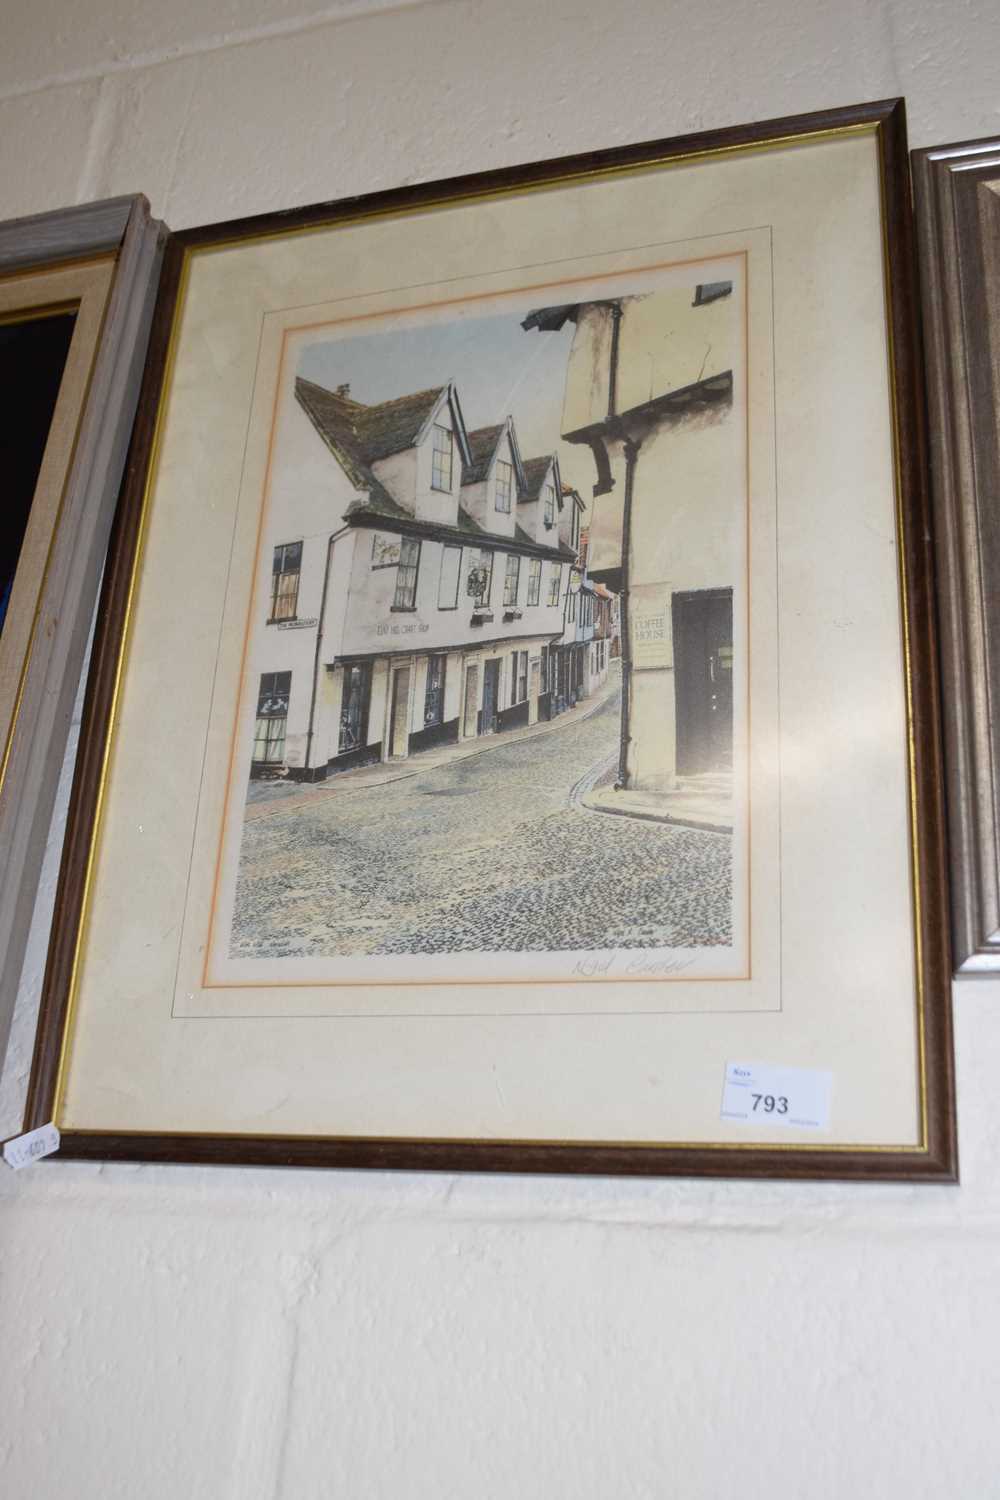 Elm Hill, reproduction print by Nigel Cardew, framed and glazed